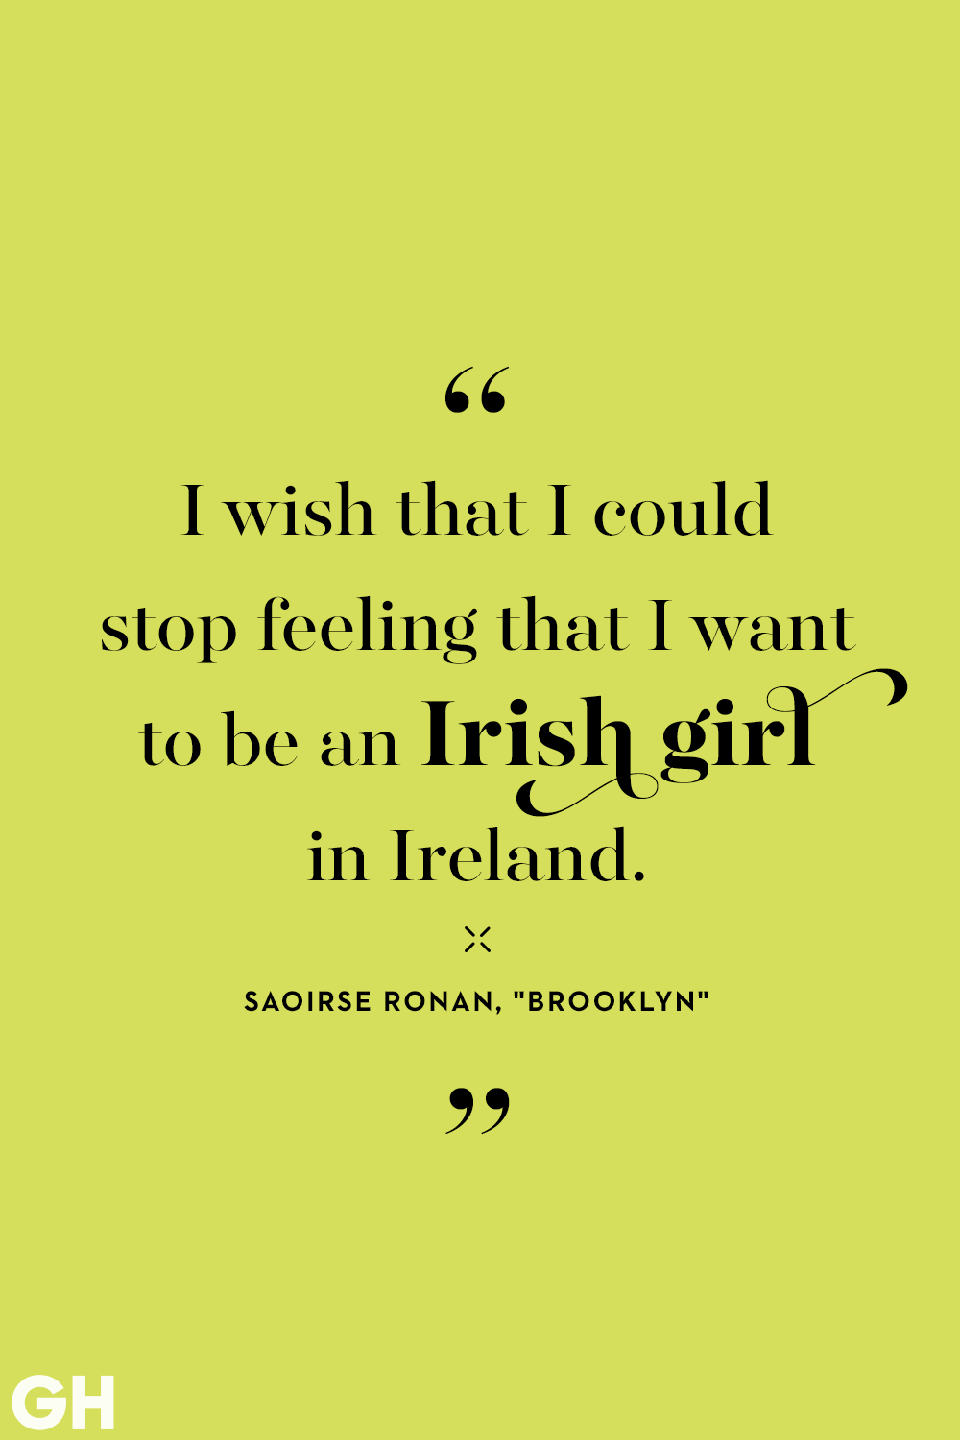 <p>I wish that I could stop feeling that I want to be an Irish girl in Ireland.</p>